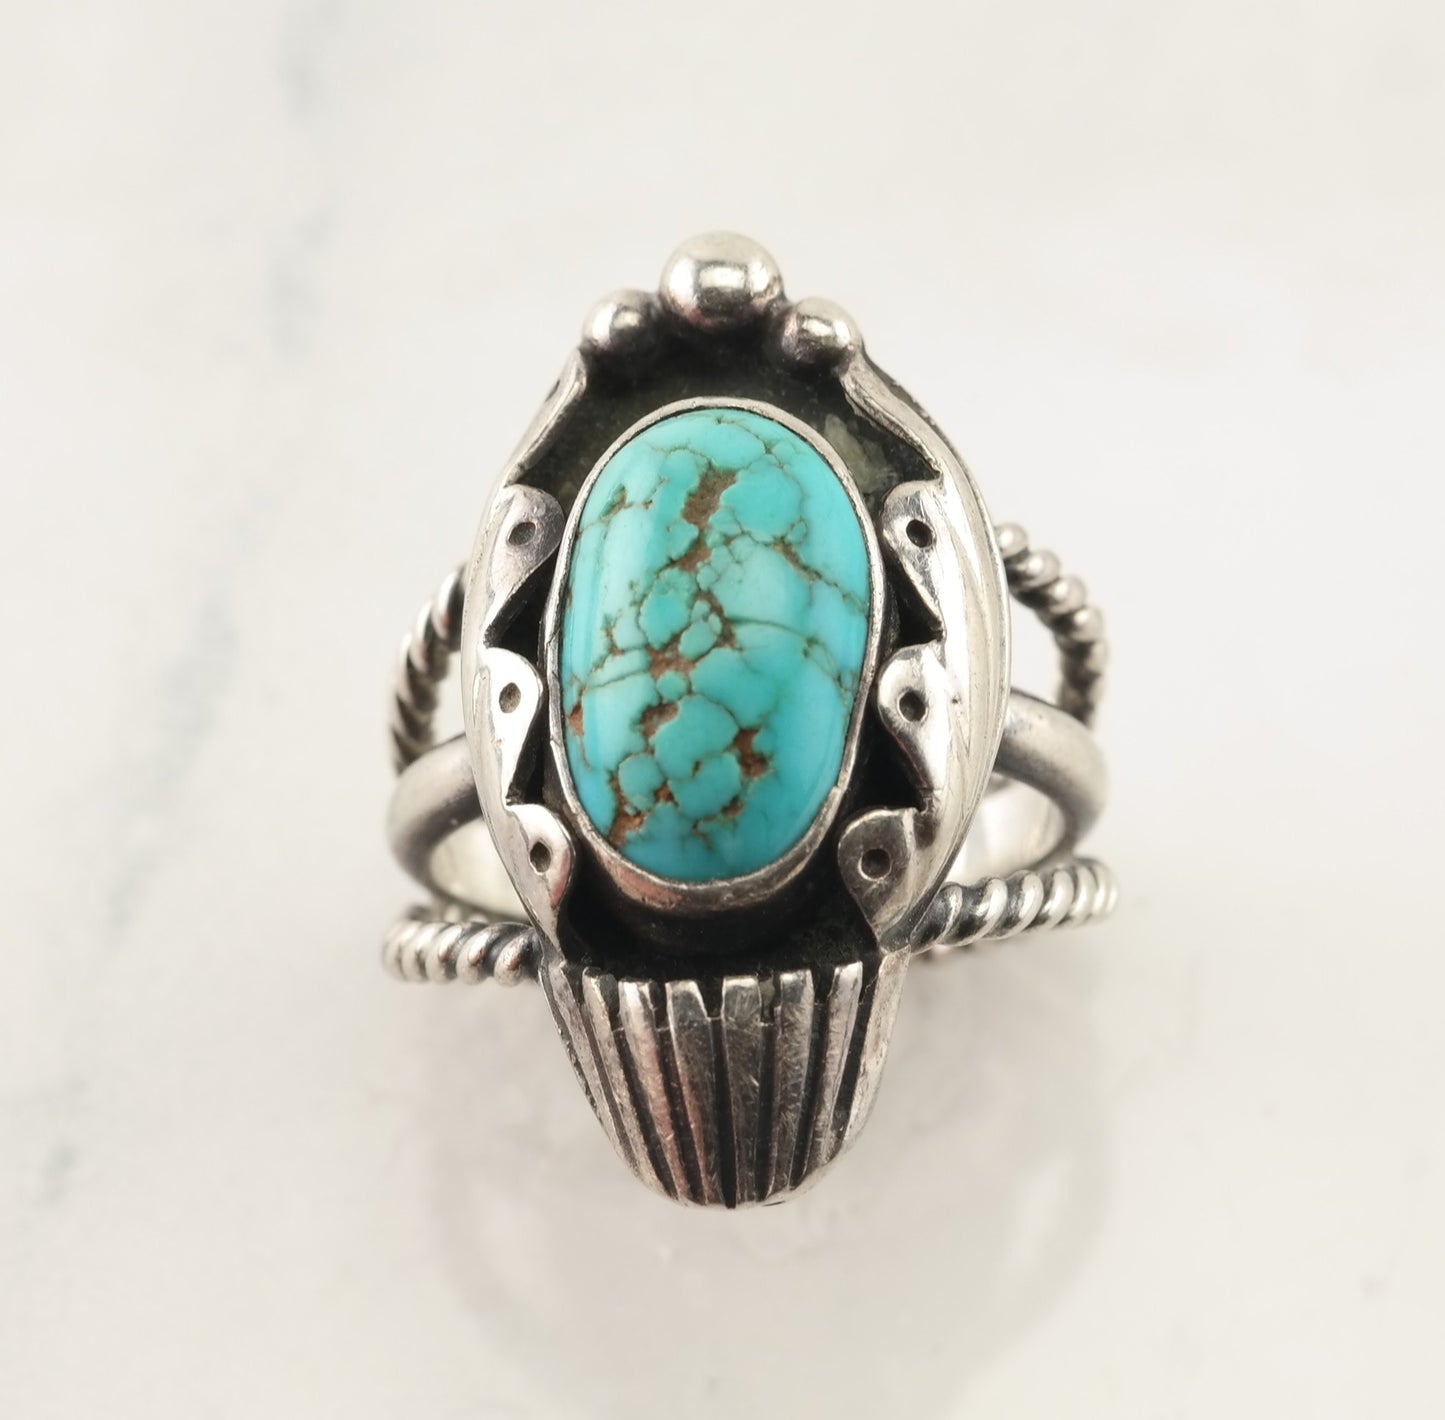 Native American Silver Ring Spiderweb Turquoise Shadowbox Sterling Size 7 1/2